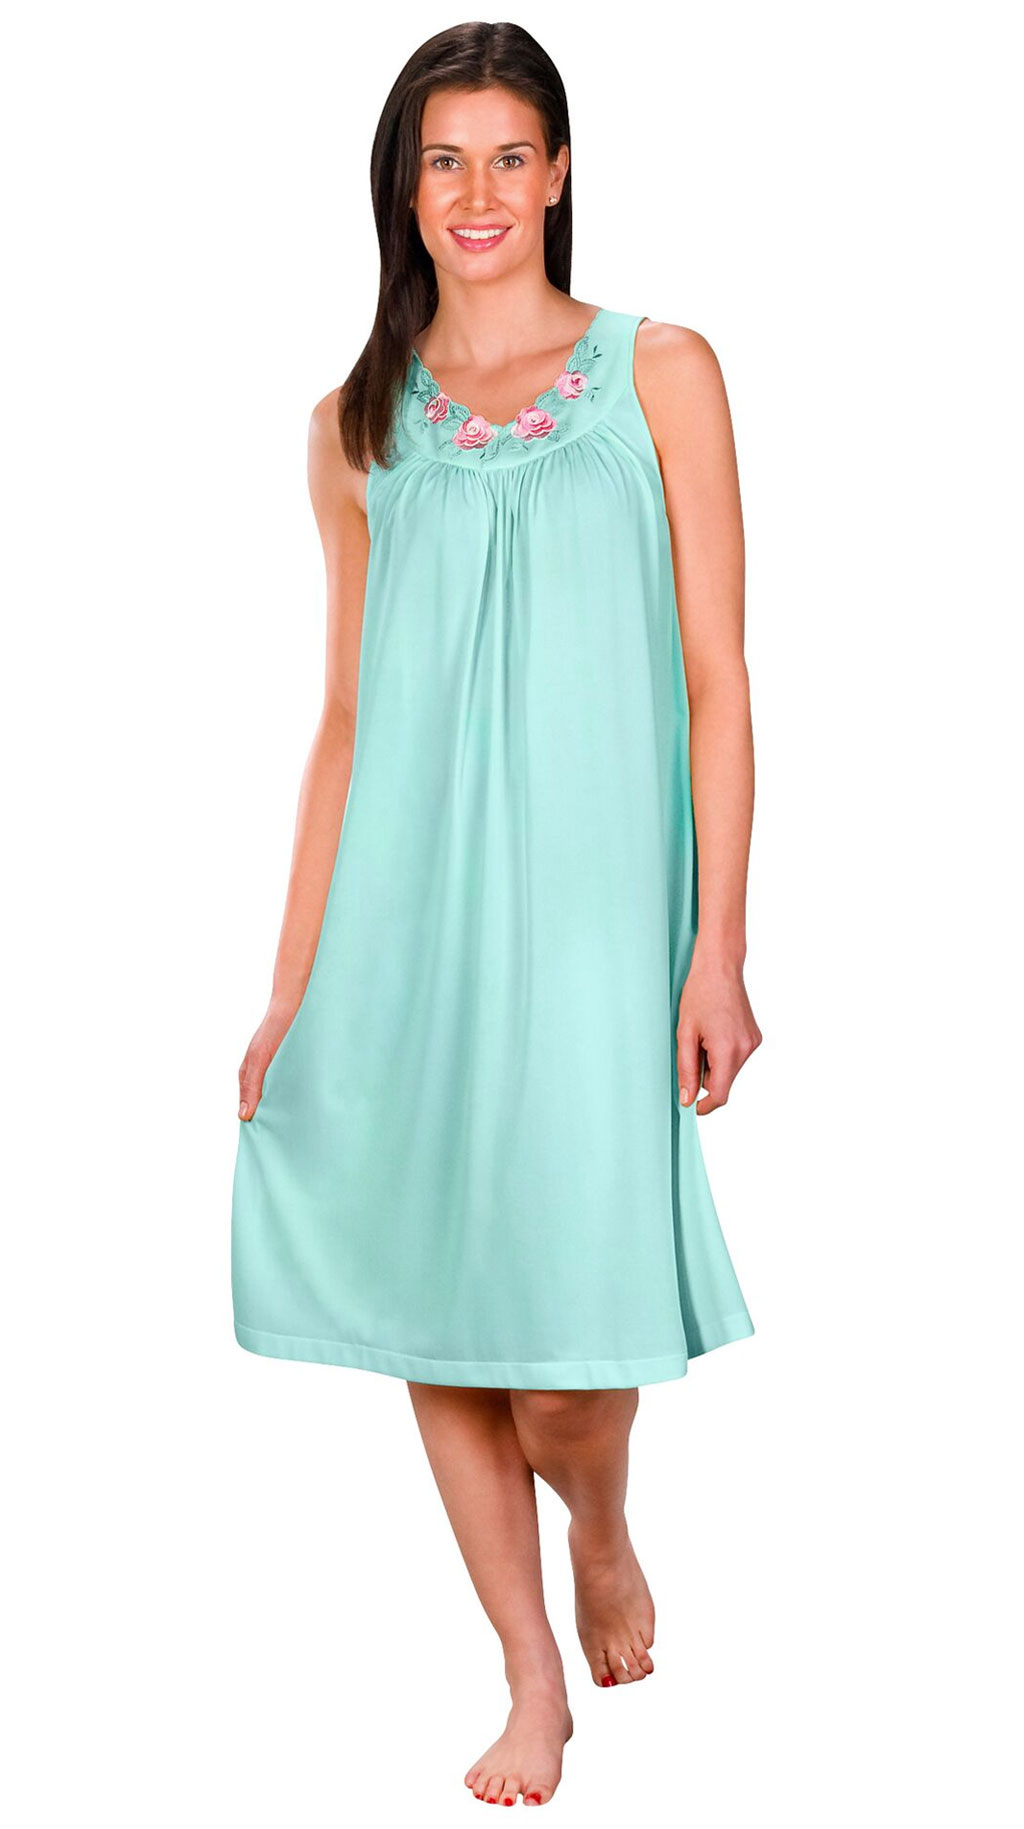 Sleeveless Womens Nightgown, Nightgowns for Women